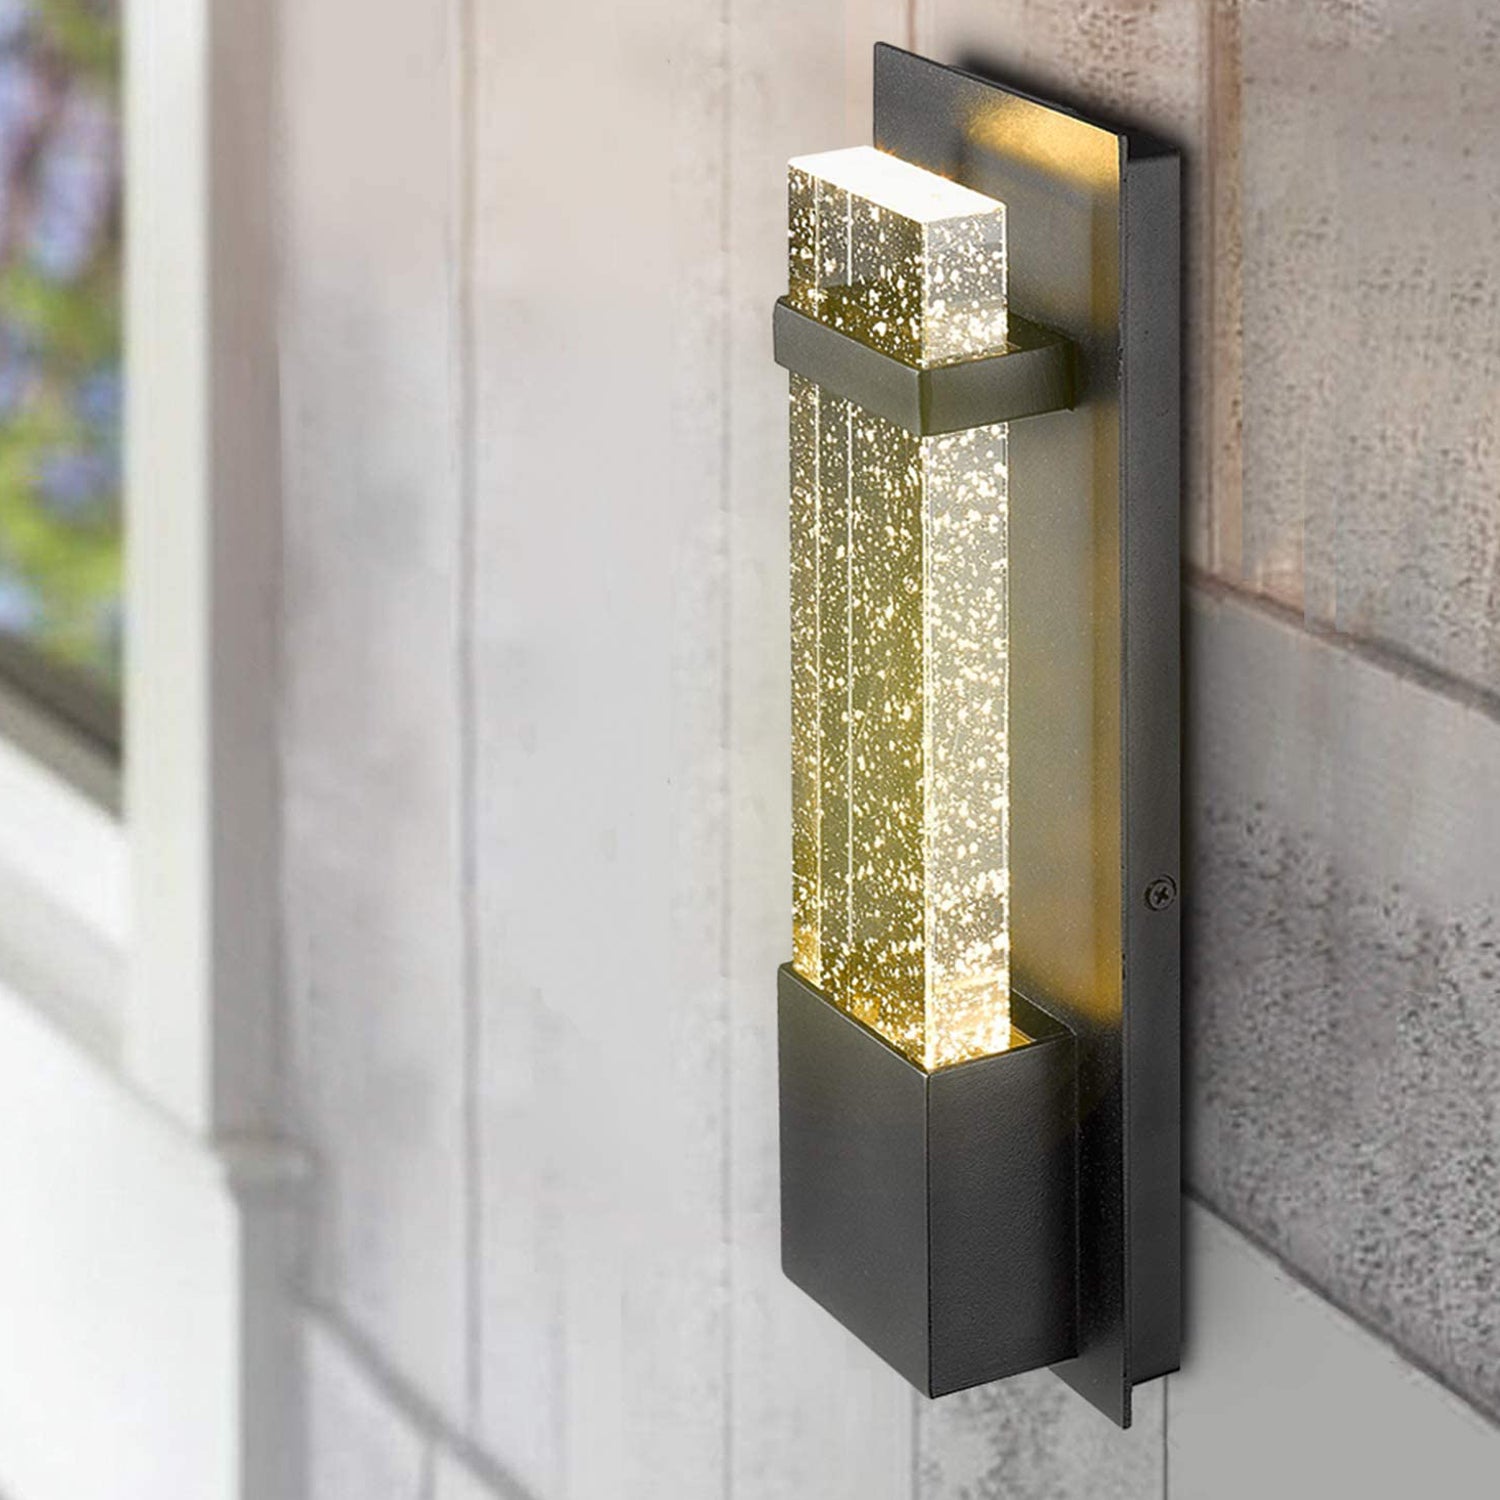 Bubble Glass LED Indoor Outdoor Wall Sconce Light, 12W, Dimmable, 4000K, 600lm, ETL Listed(Wet Location), For Front Door, Doorway, Foyer, Corridor, Balcony, Patio and Porch